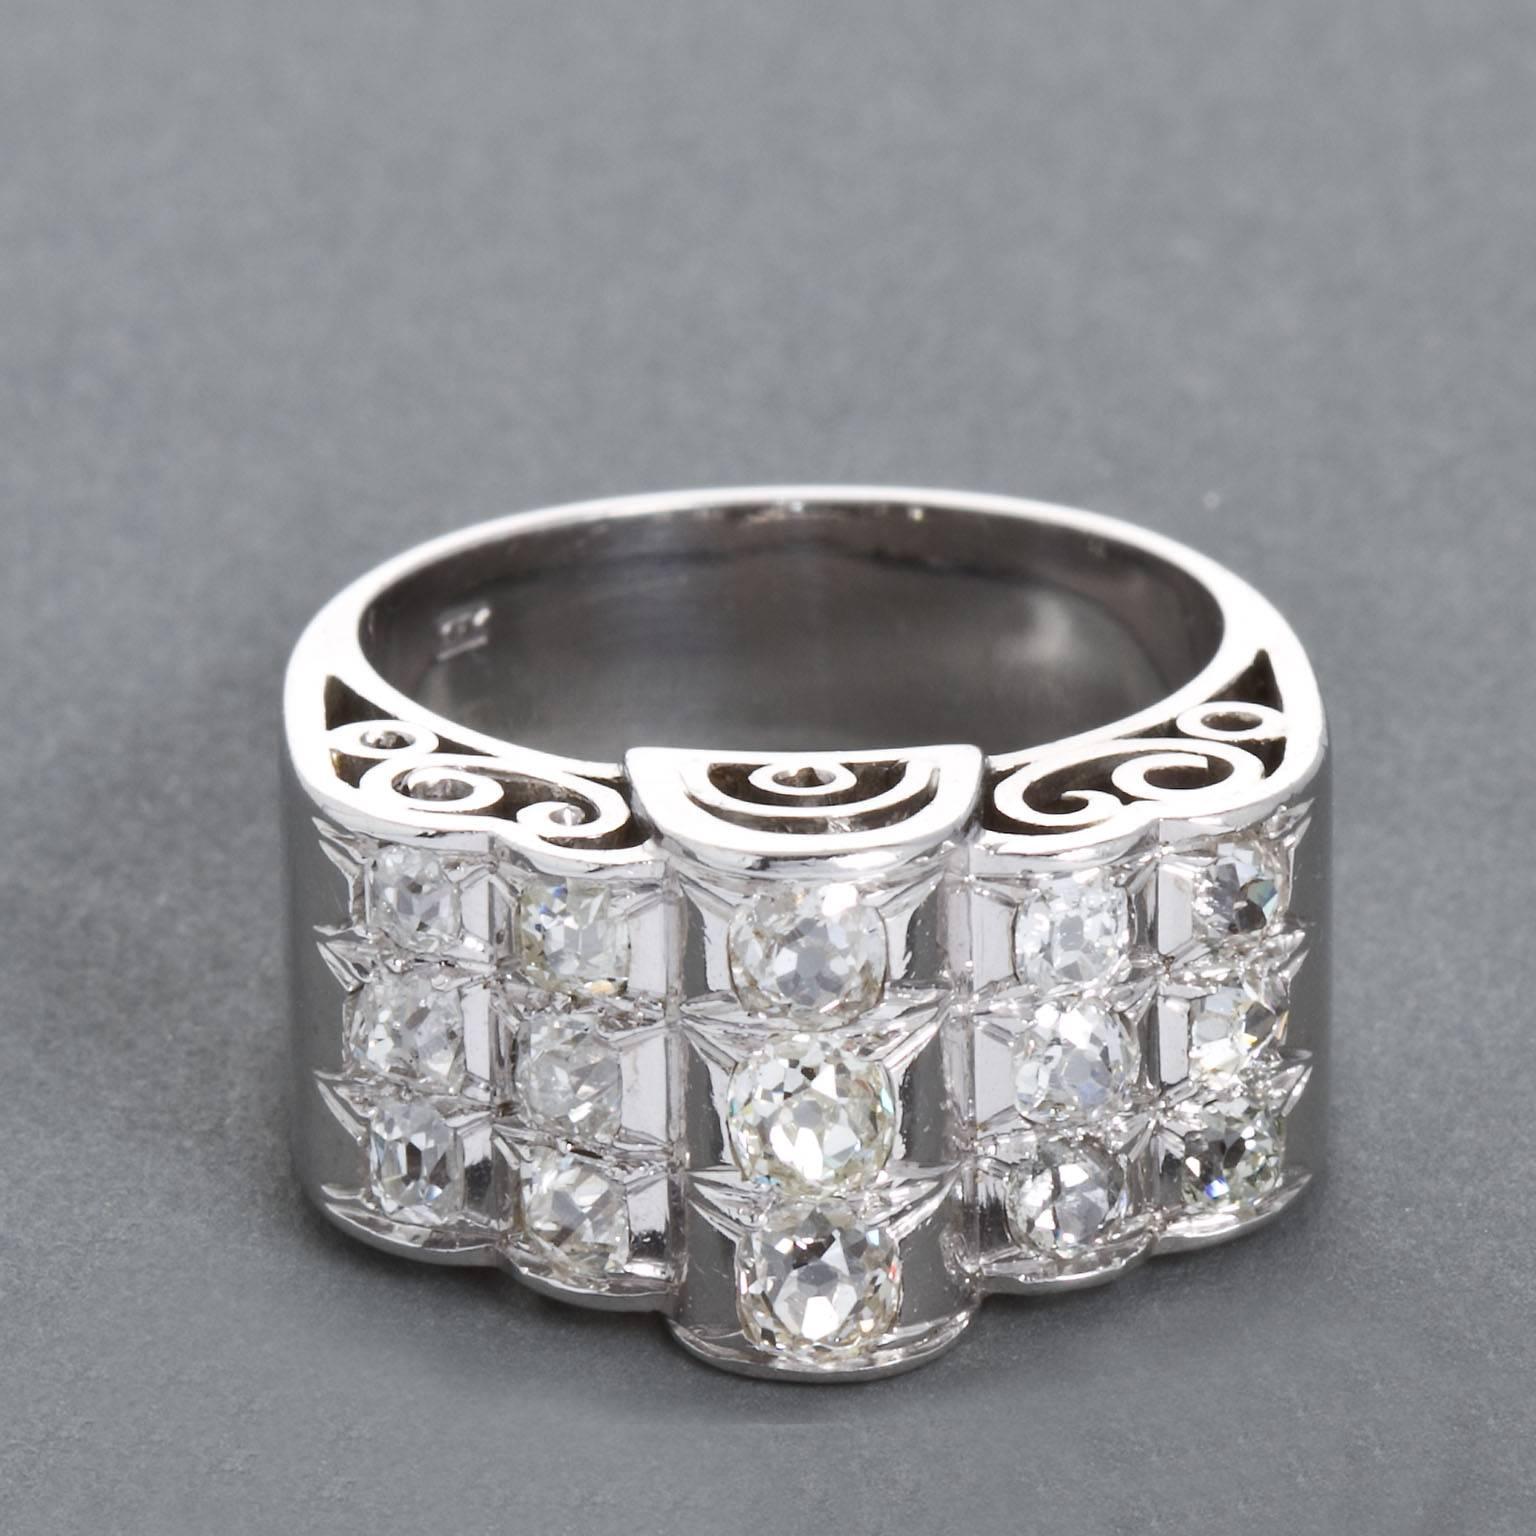 A 14 karat diamond in white gold  ring.  Set with 15 old miner cut diamonds of approx 1.80 ctw.  Gallery side is designed with a filigreed motif.

No. 3729